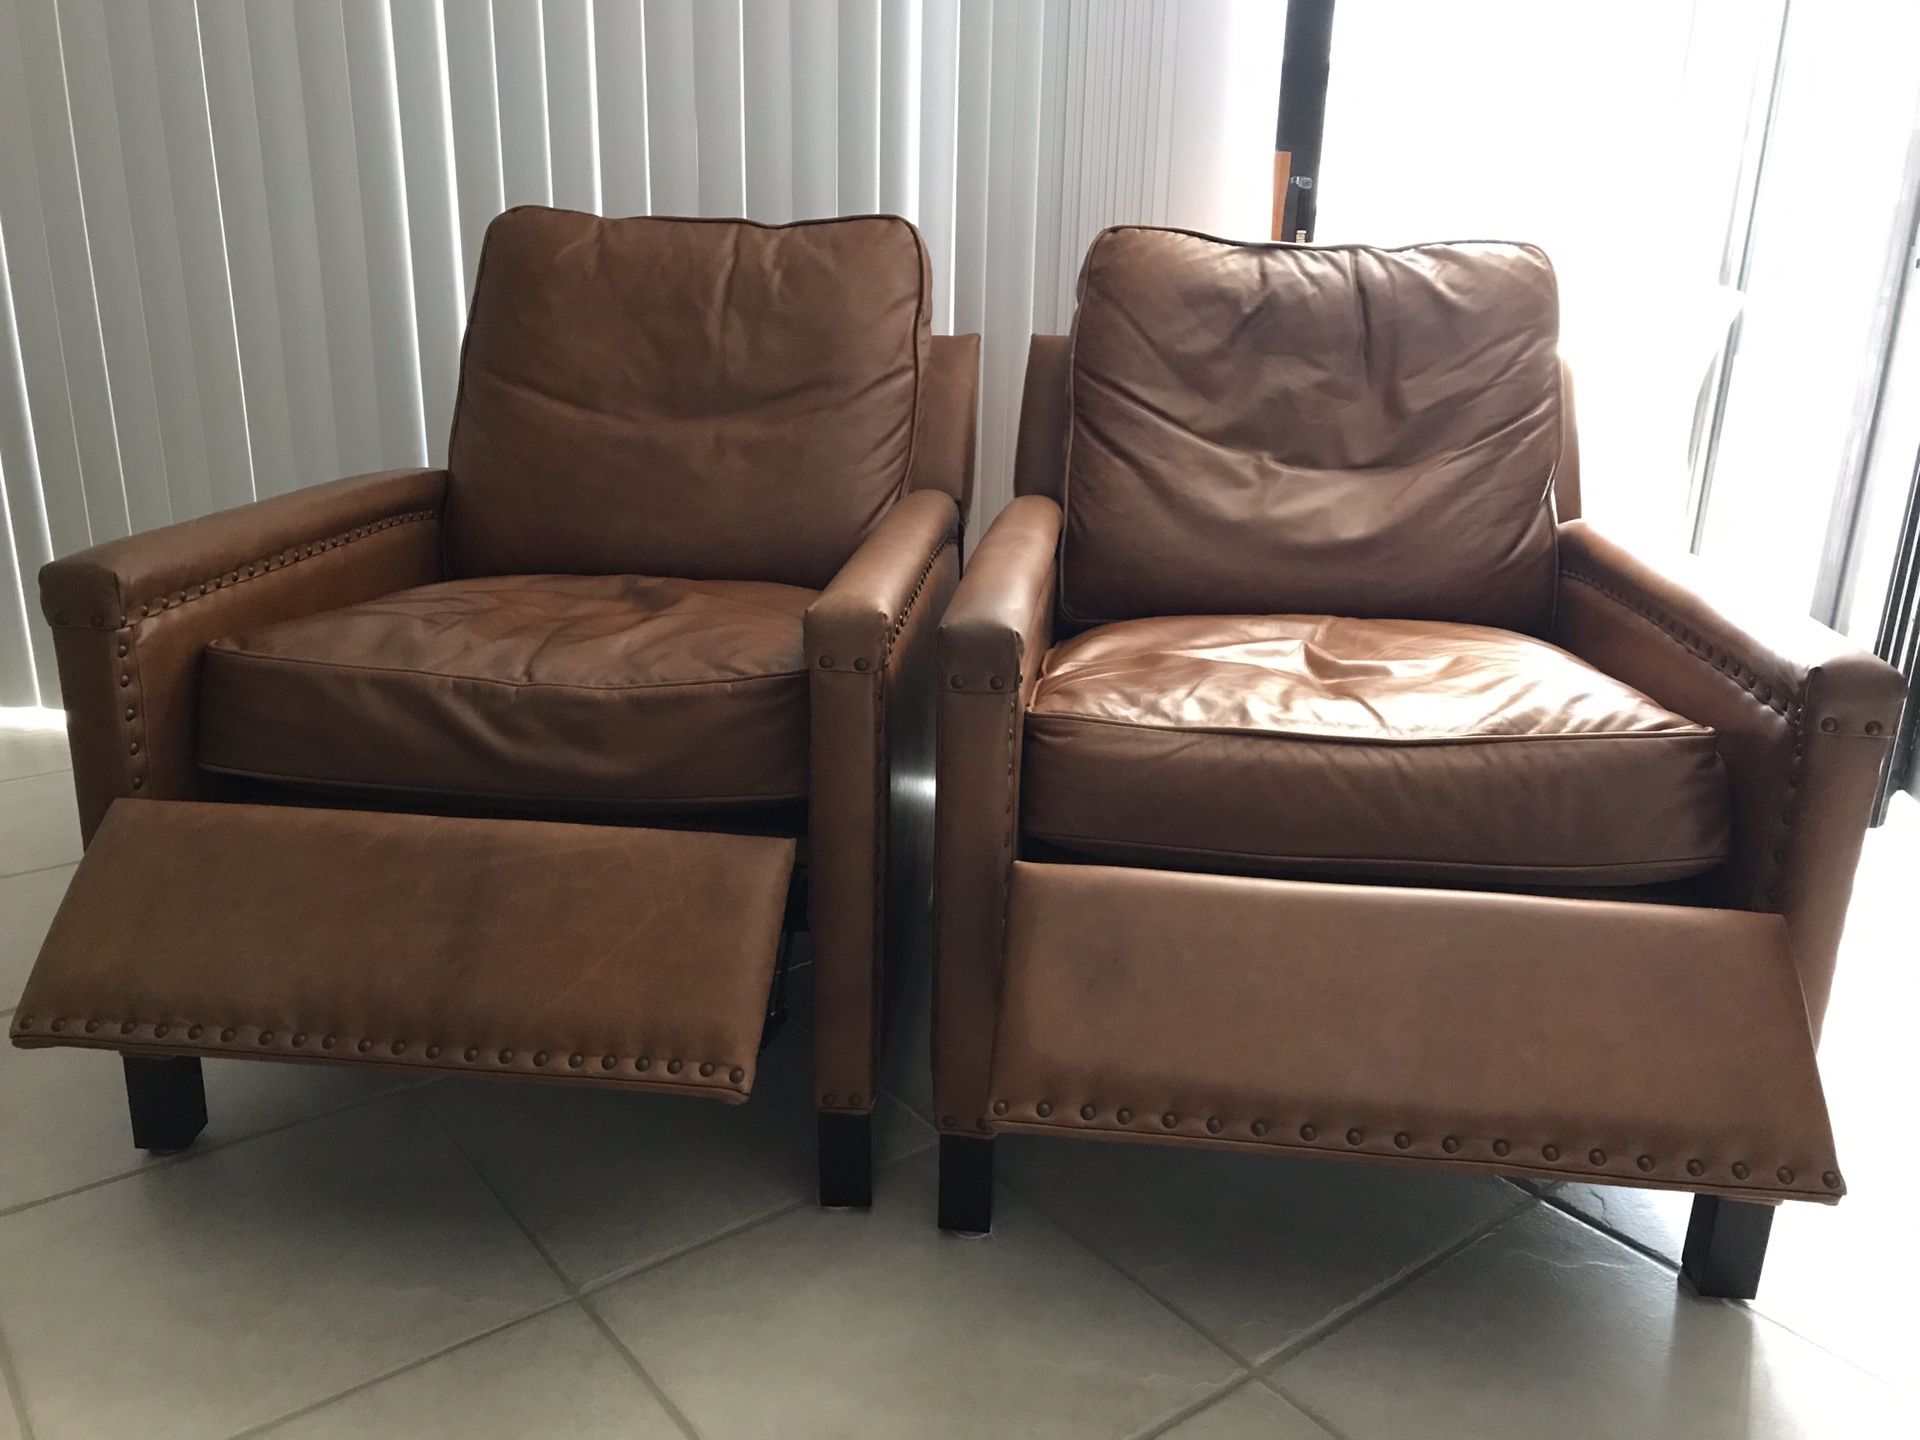 Chairs are brand new $500 for both chairs